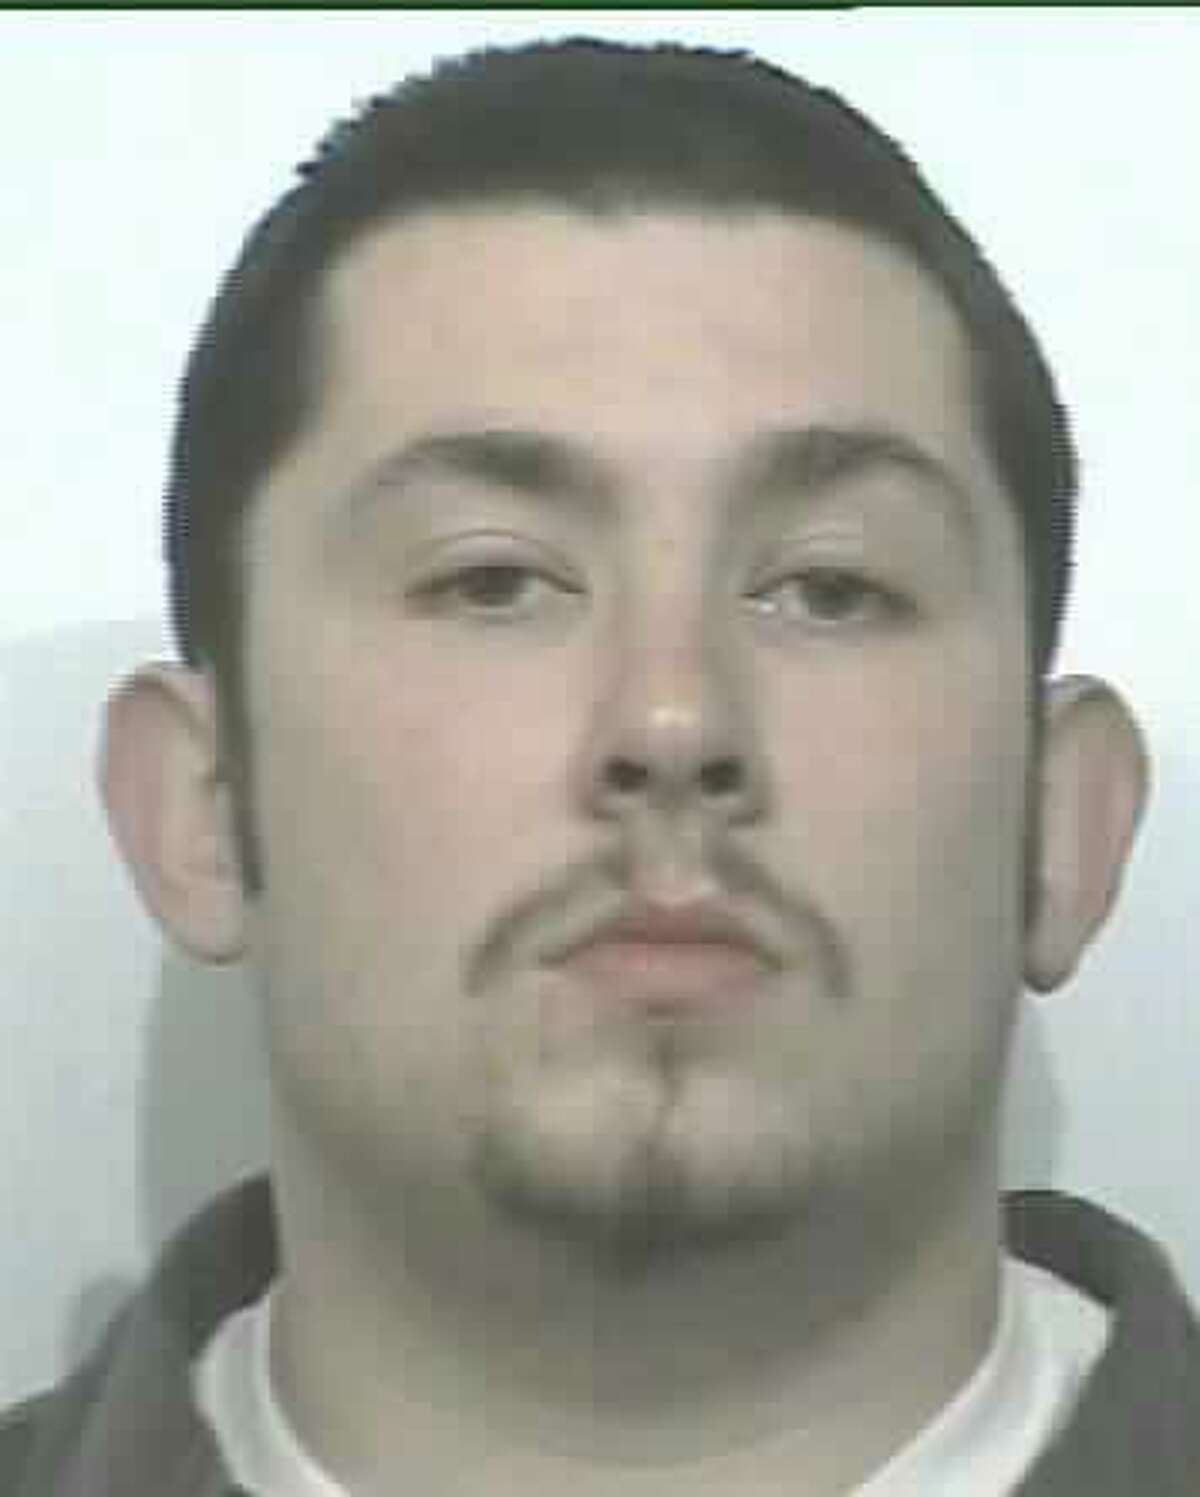 Travis Rosenfelt, pictured in a Department of Corrections photo.